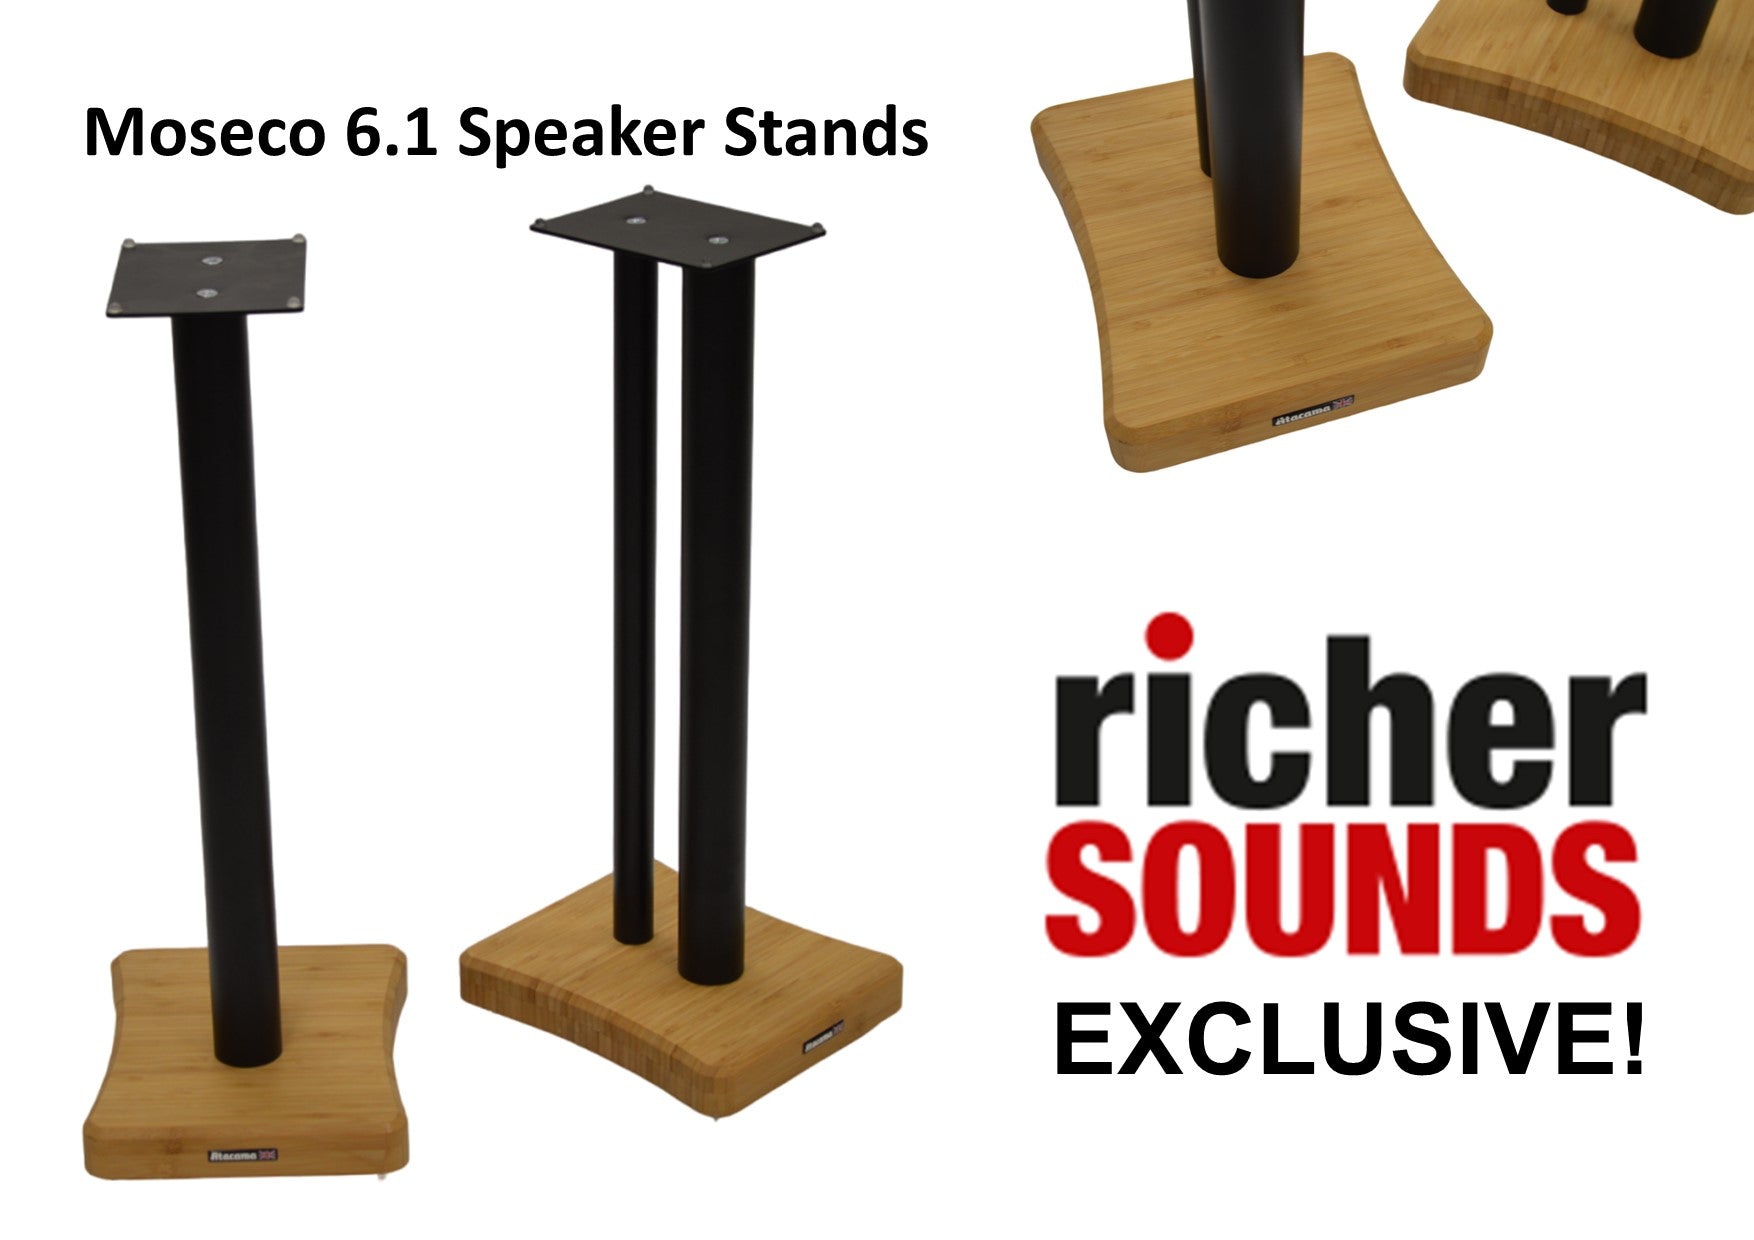 NEW! Atacama Moseco 6.1 speaker stands commissioned exclusively for Richer Sounds.